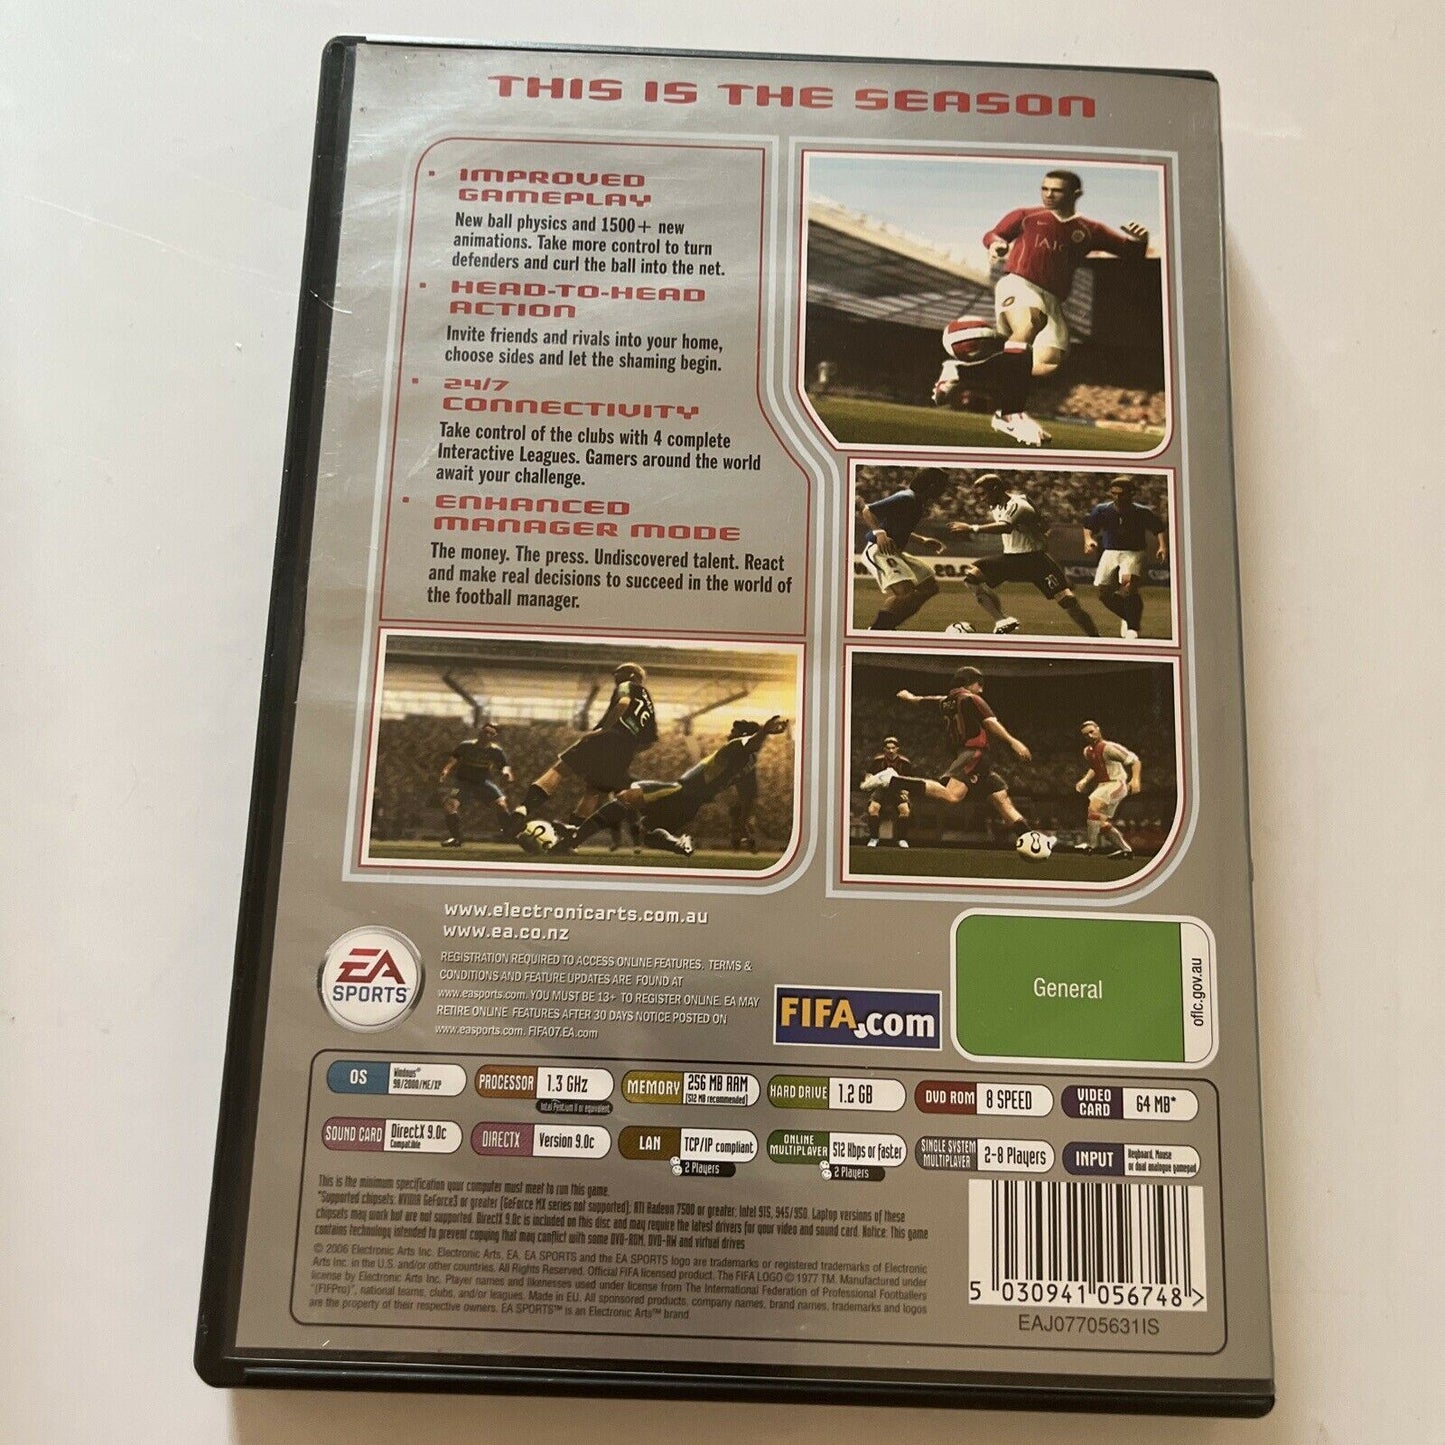 FIFA 07 - PC DVD-ROM Game EA Sports With Manual